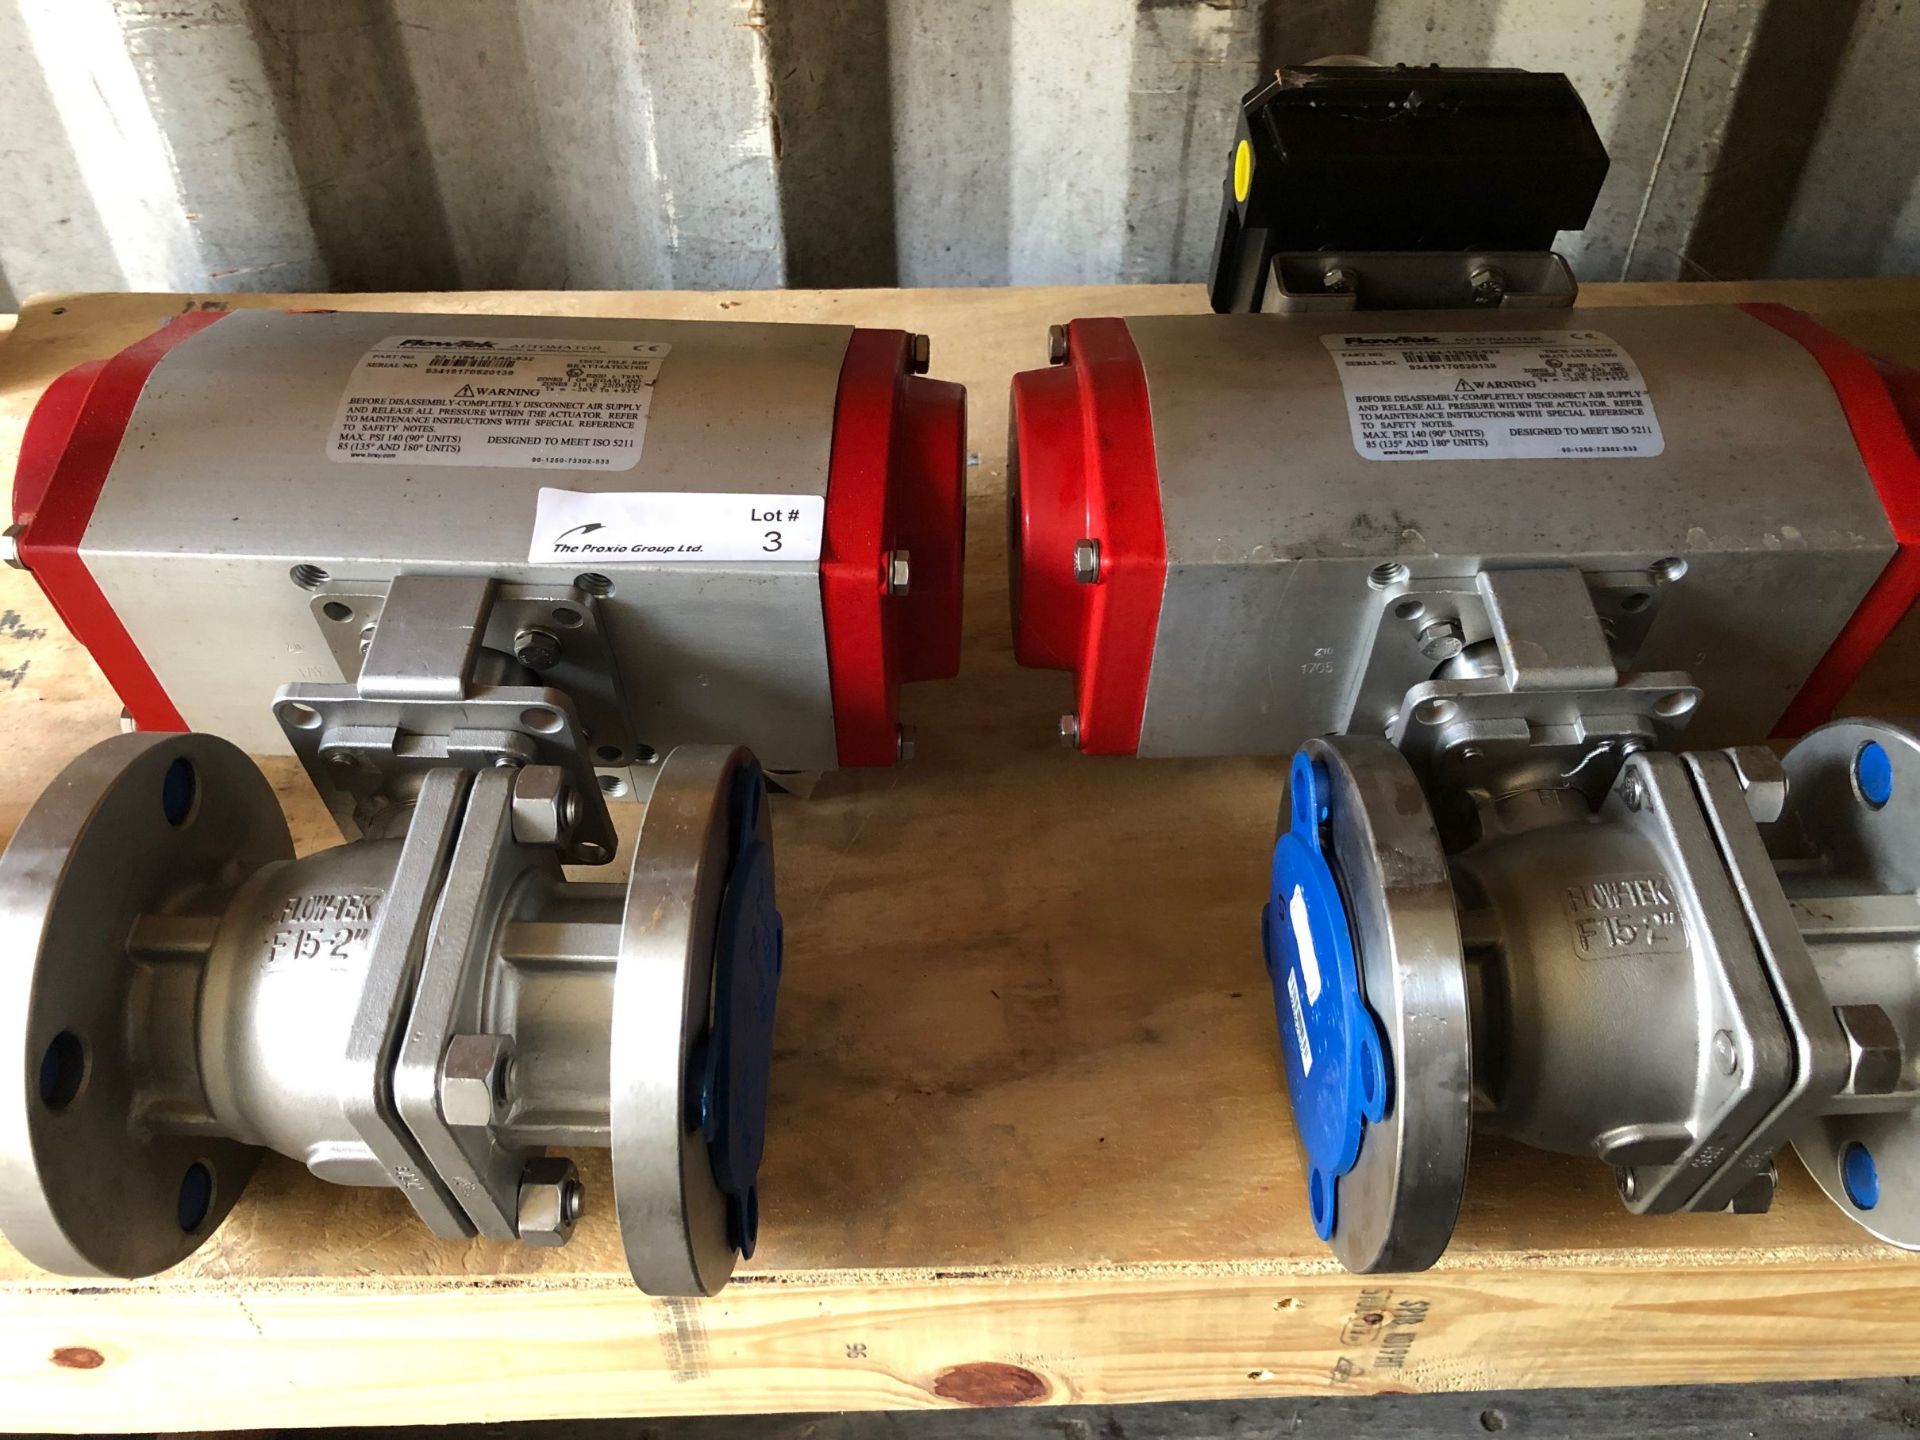 (2) Flow-Tech Model 93-1194-113A0-523 2" Electrically Actuated Valves